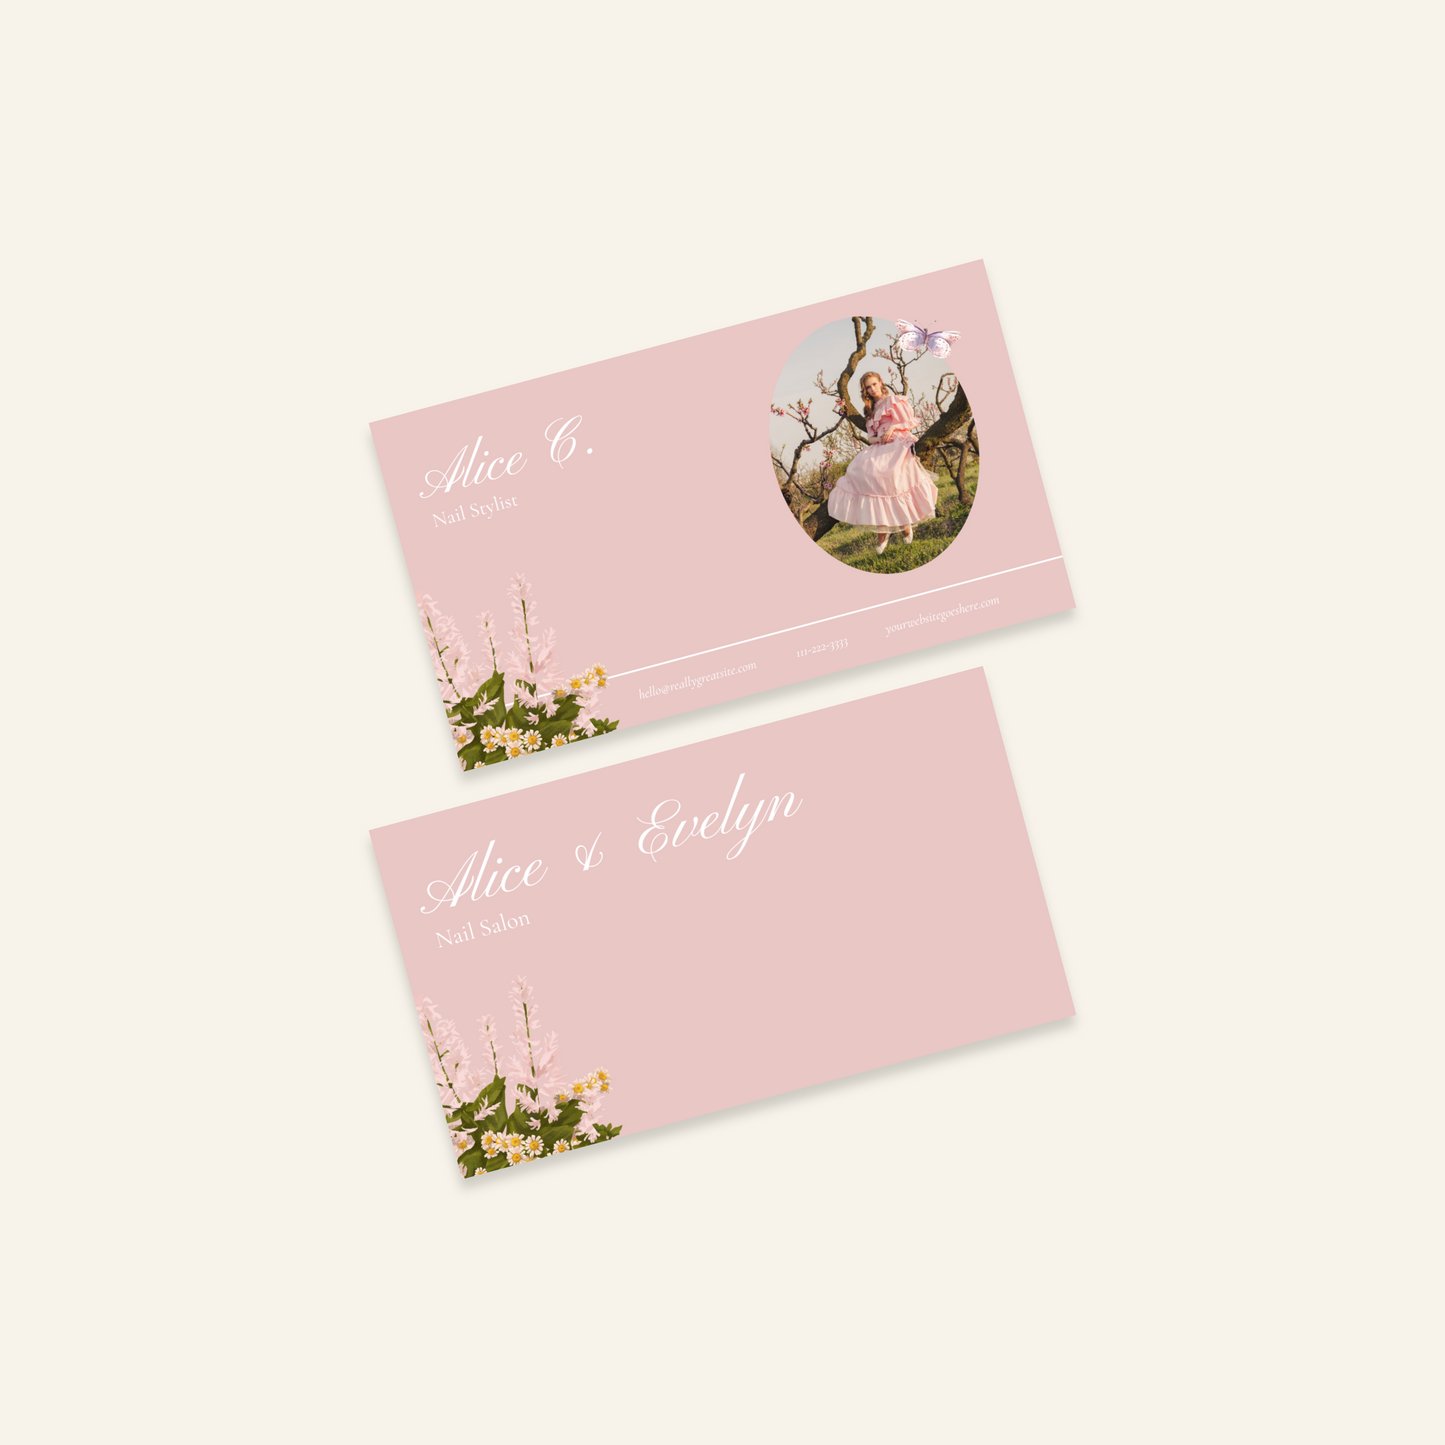 Alice & Evelyn - Stationary Kit Template